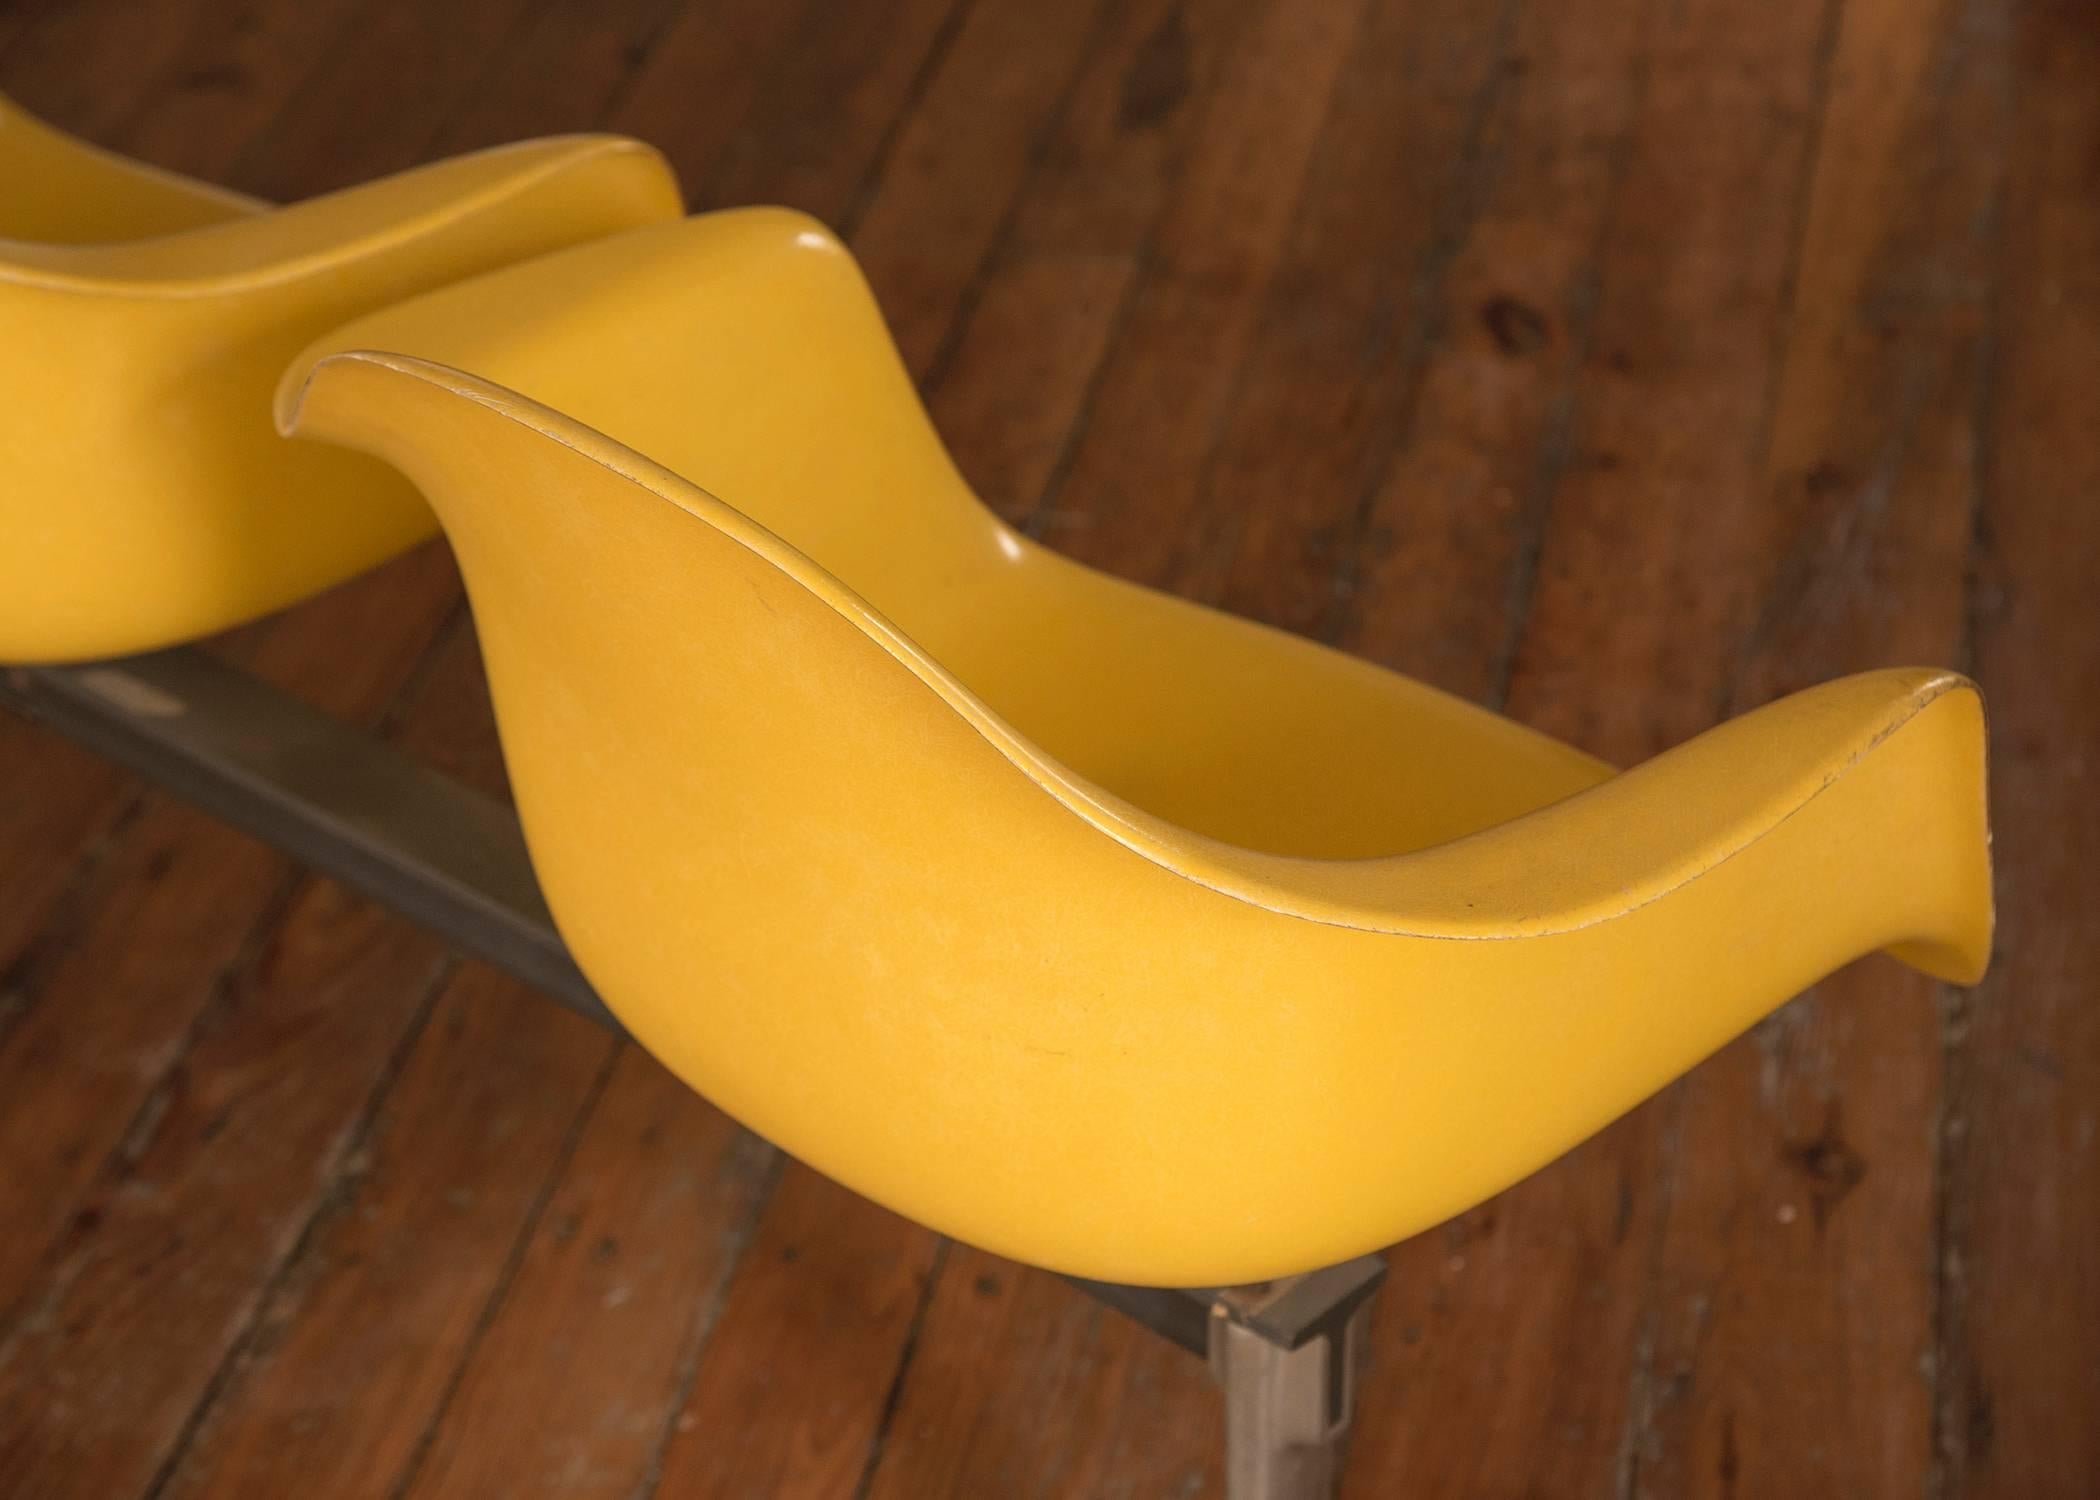 Vintage tandem seating by Eames for Herman Miller, the seating has three fiberglass seats in sunny yellow with a chromed and black metal base.
Seat height 18